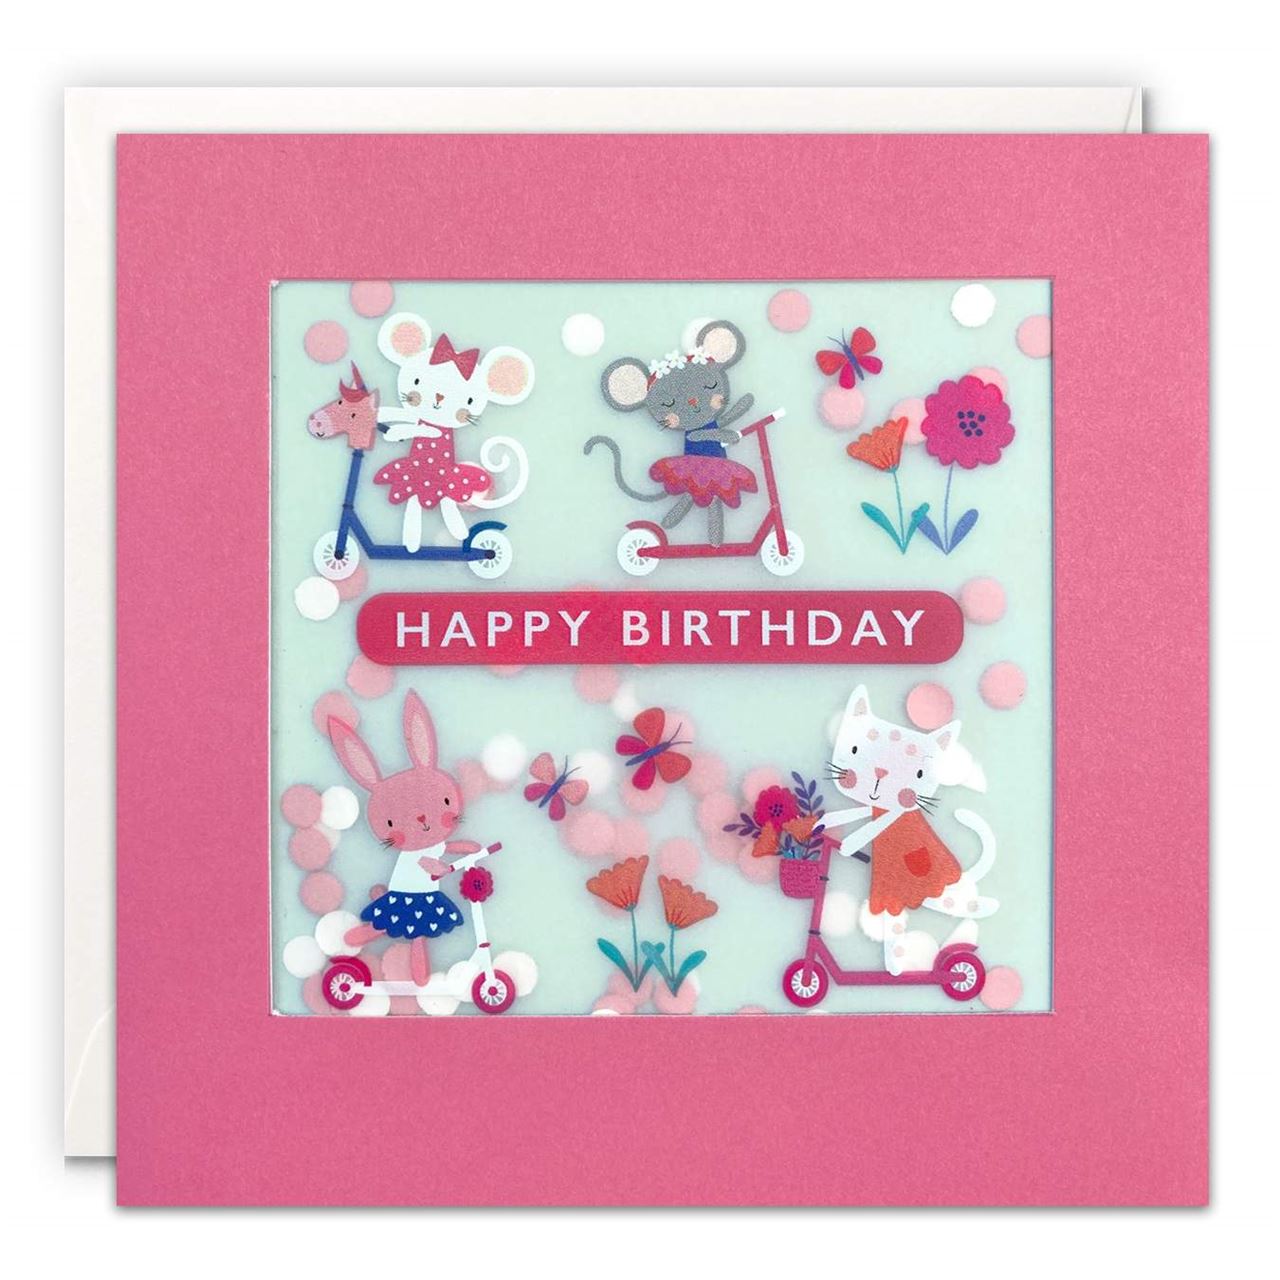 Shakie Birthday Card | Animals on Scooters